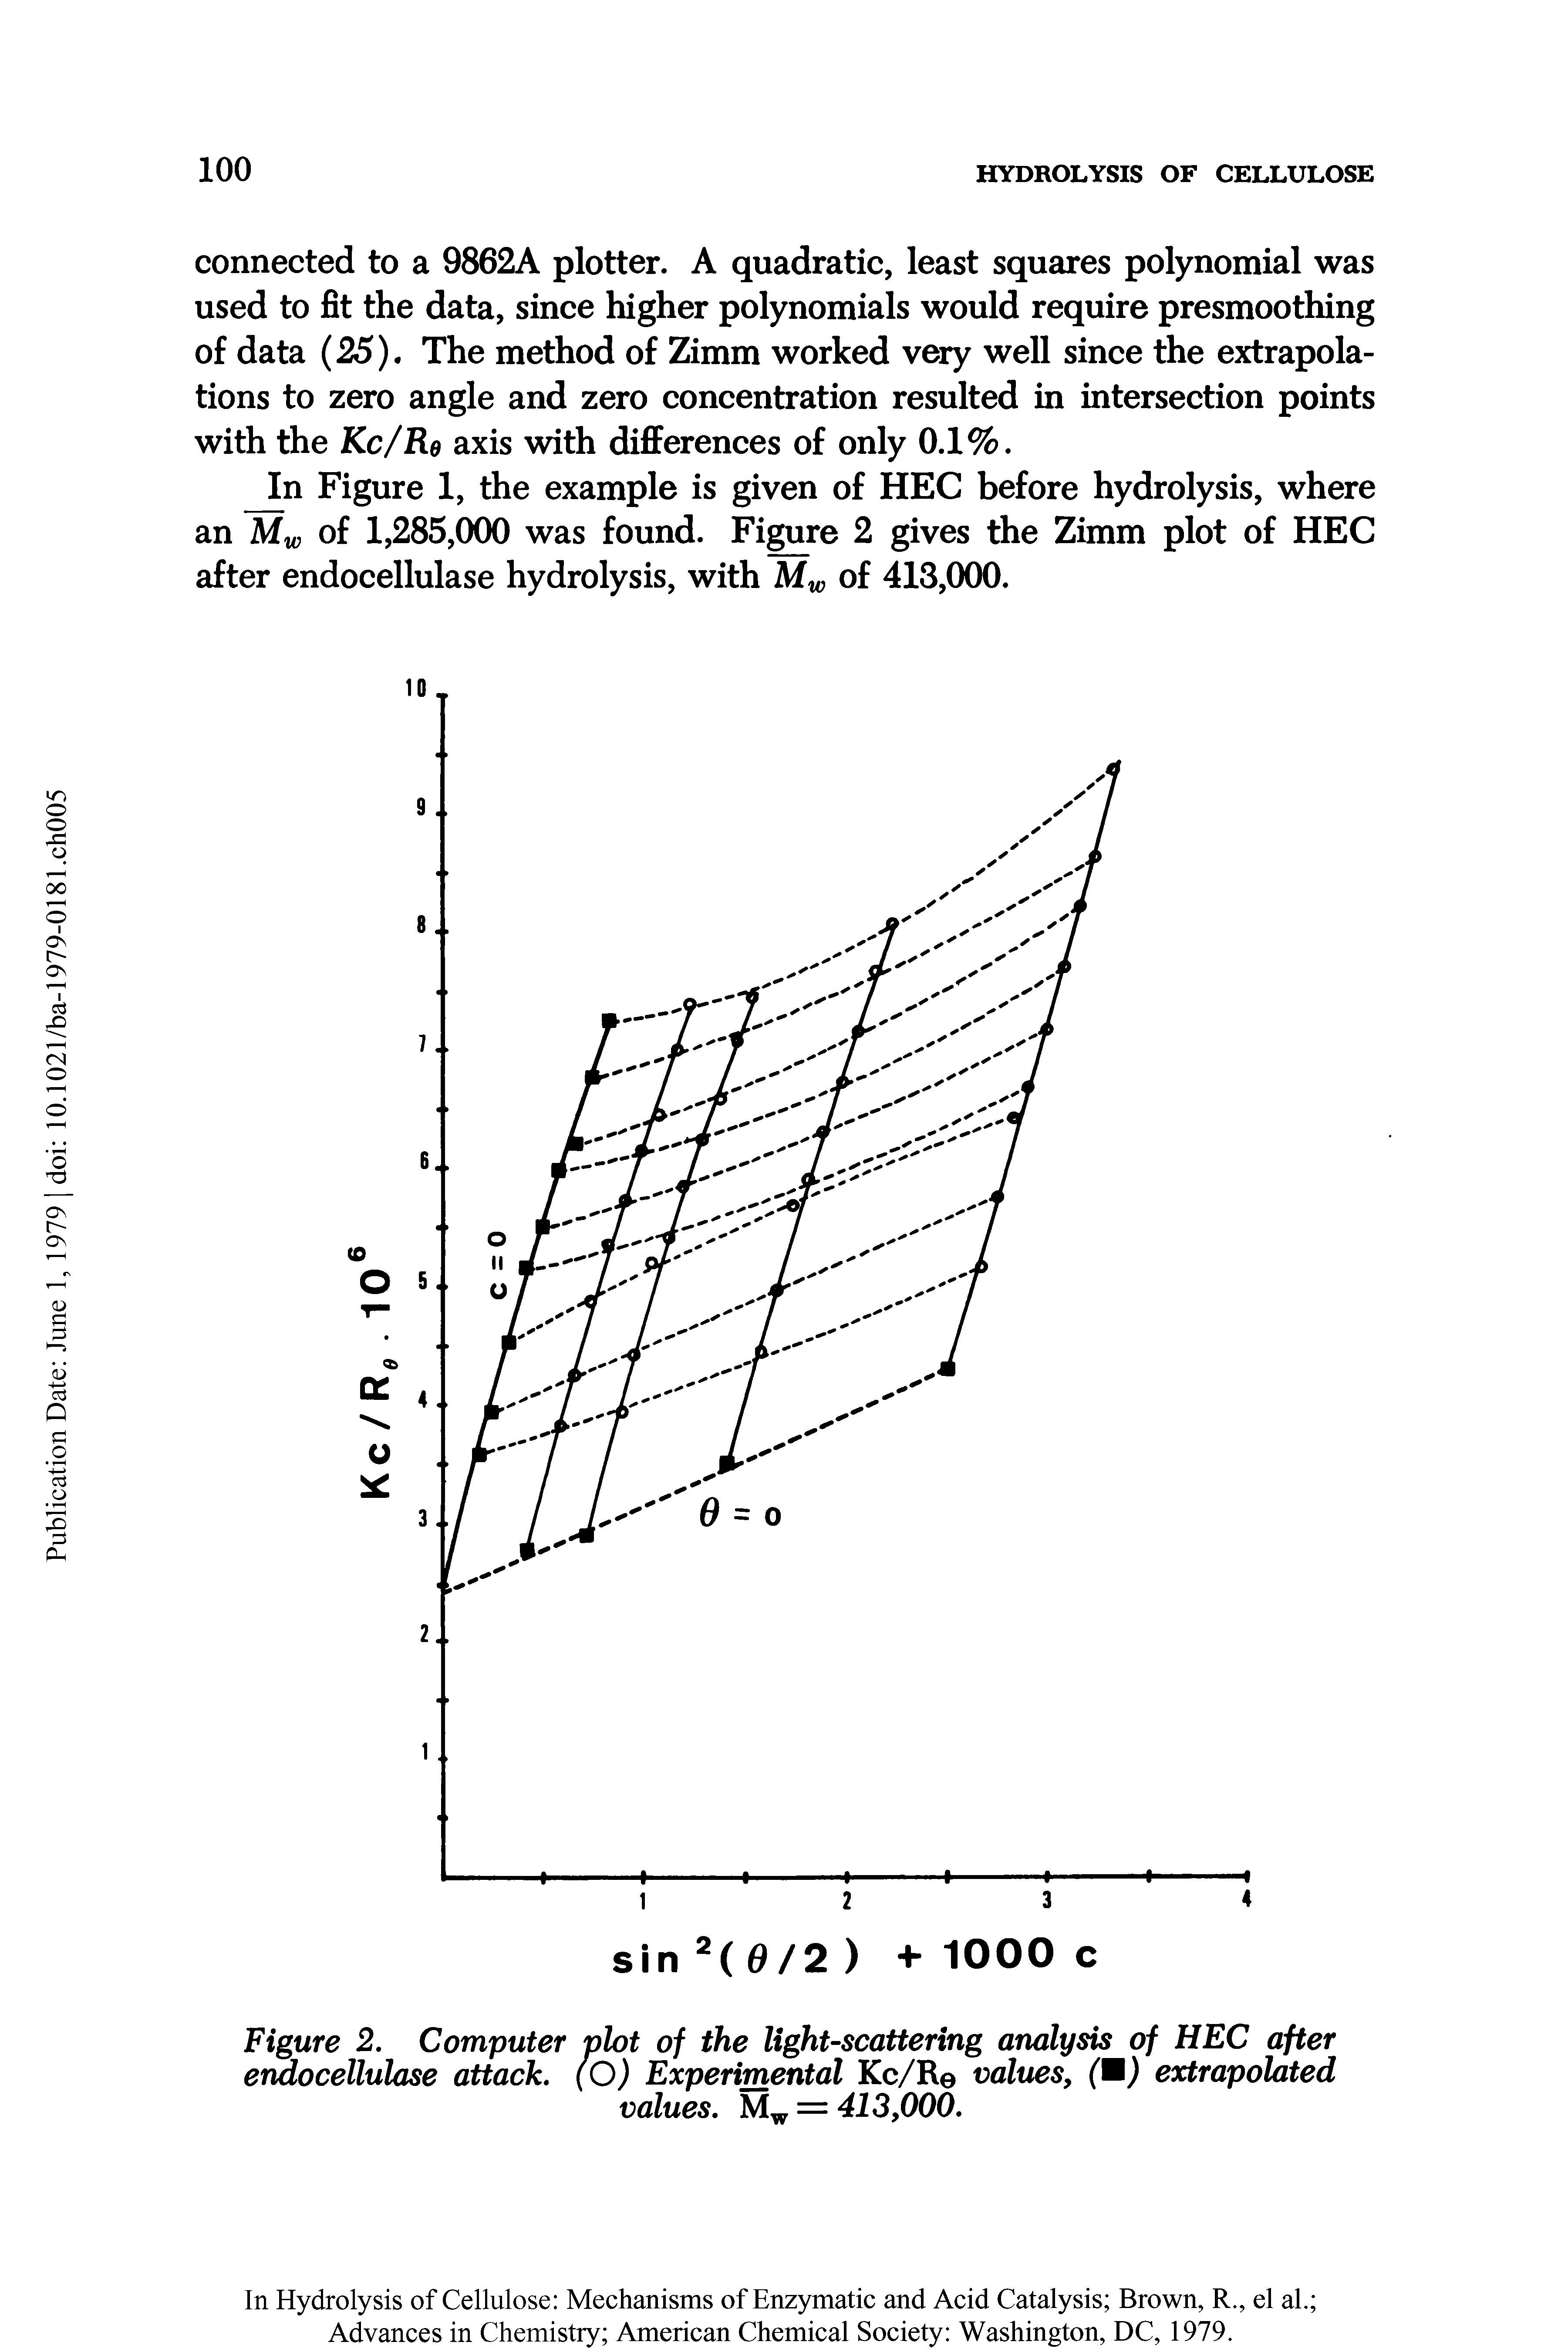 Figure 2. Computer plot of the light-scattering analysis of HEC after endocellulase attach (O) Experimental Kc/Re values, extrapolated...